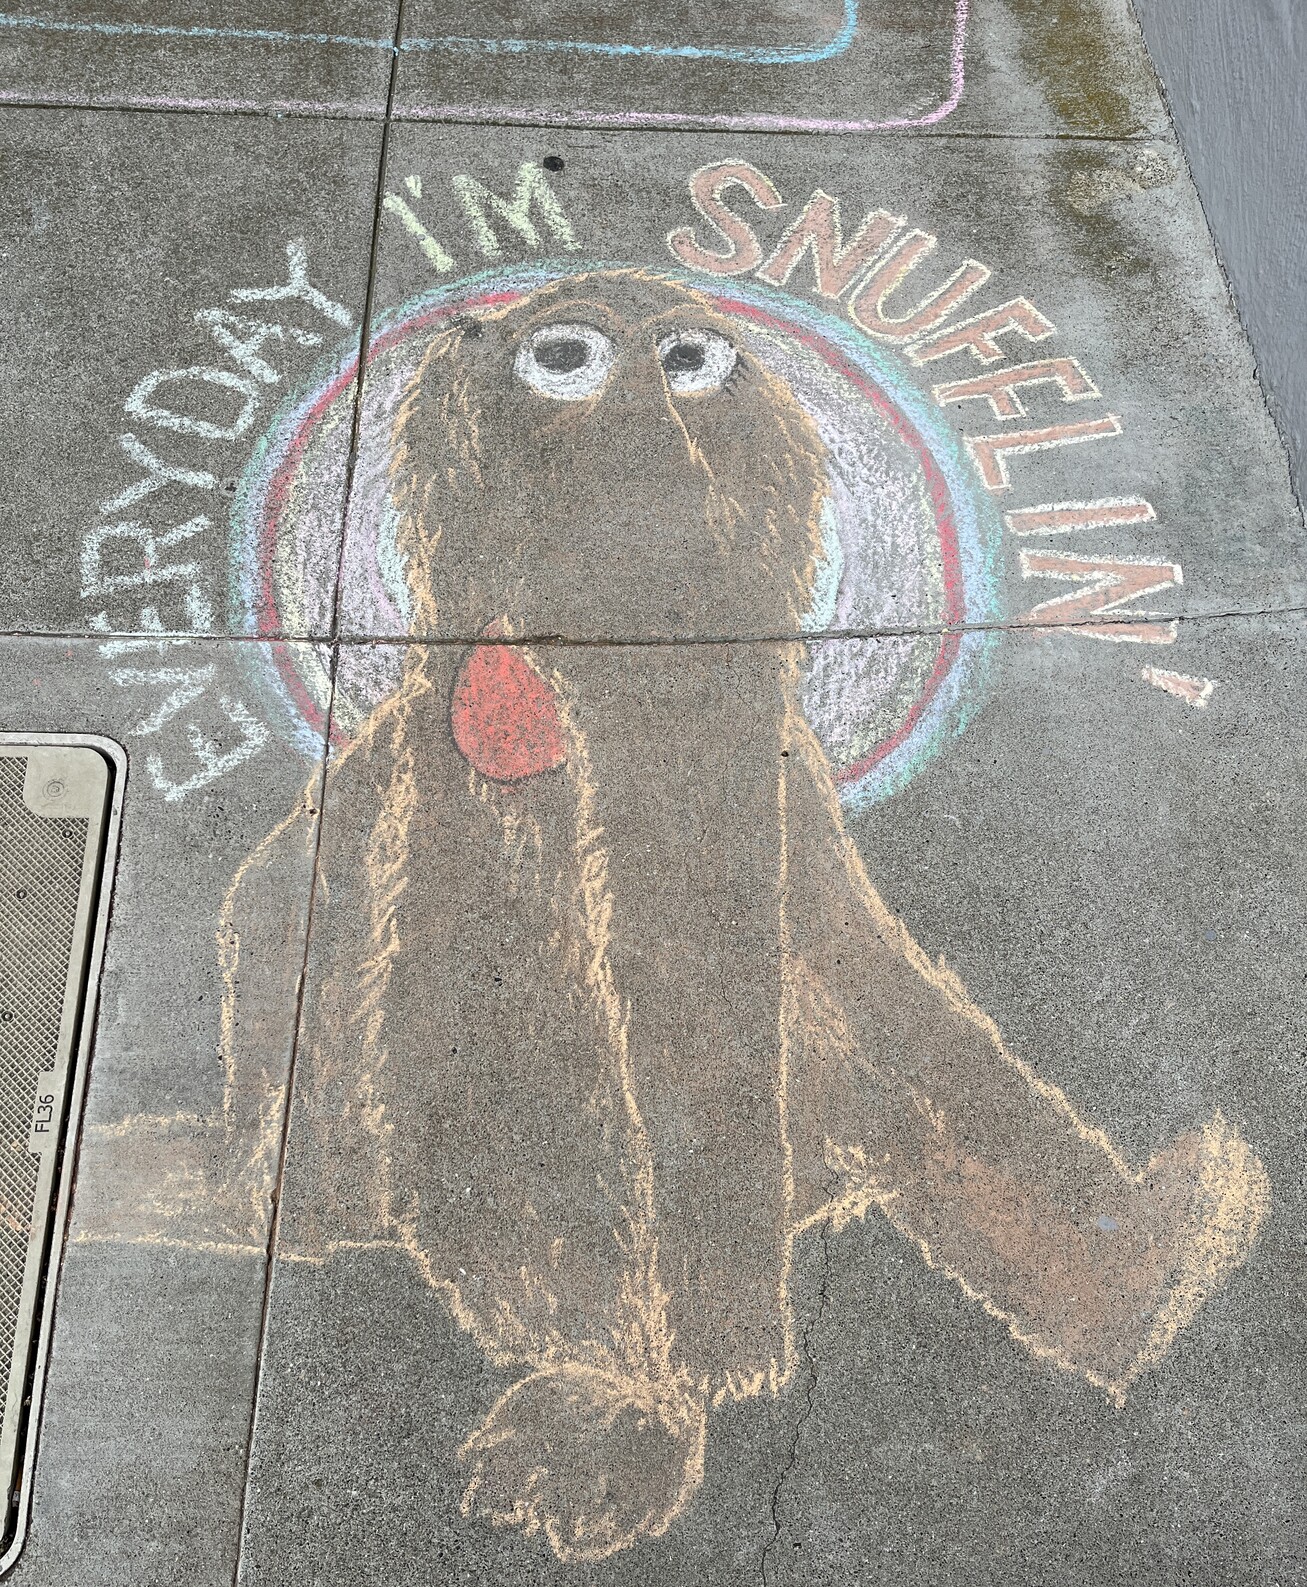 Chalk drawing of Snuffleupagus from Sesame Street haloed with the words “Everyday I’m Snuffling” 